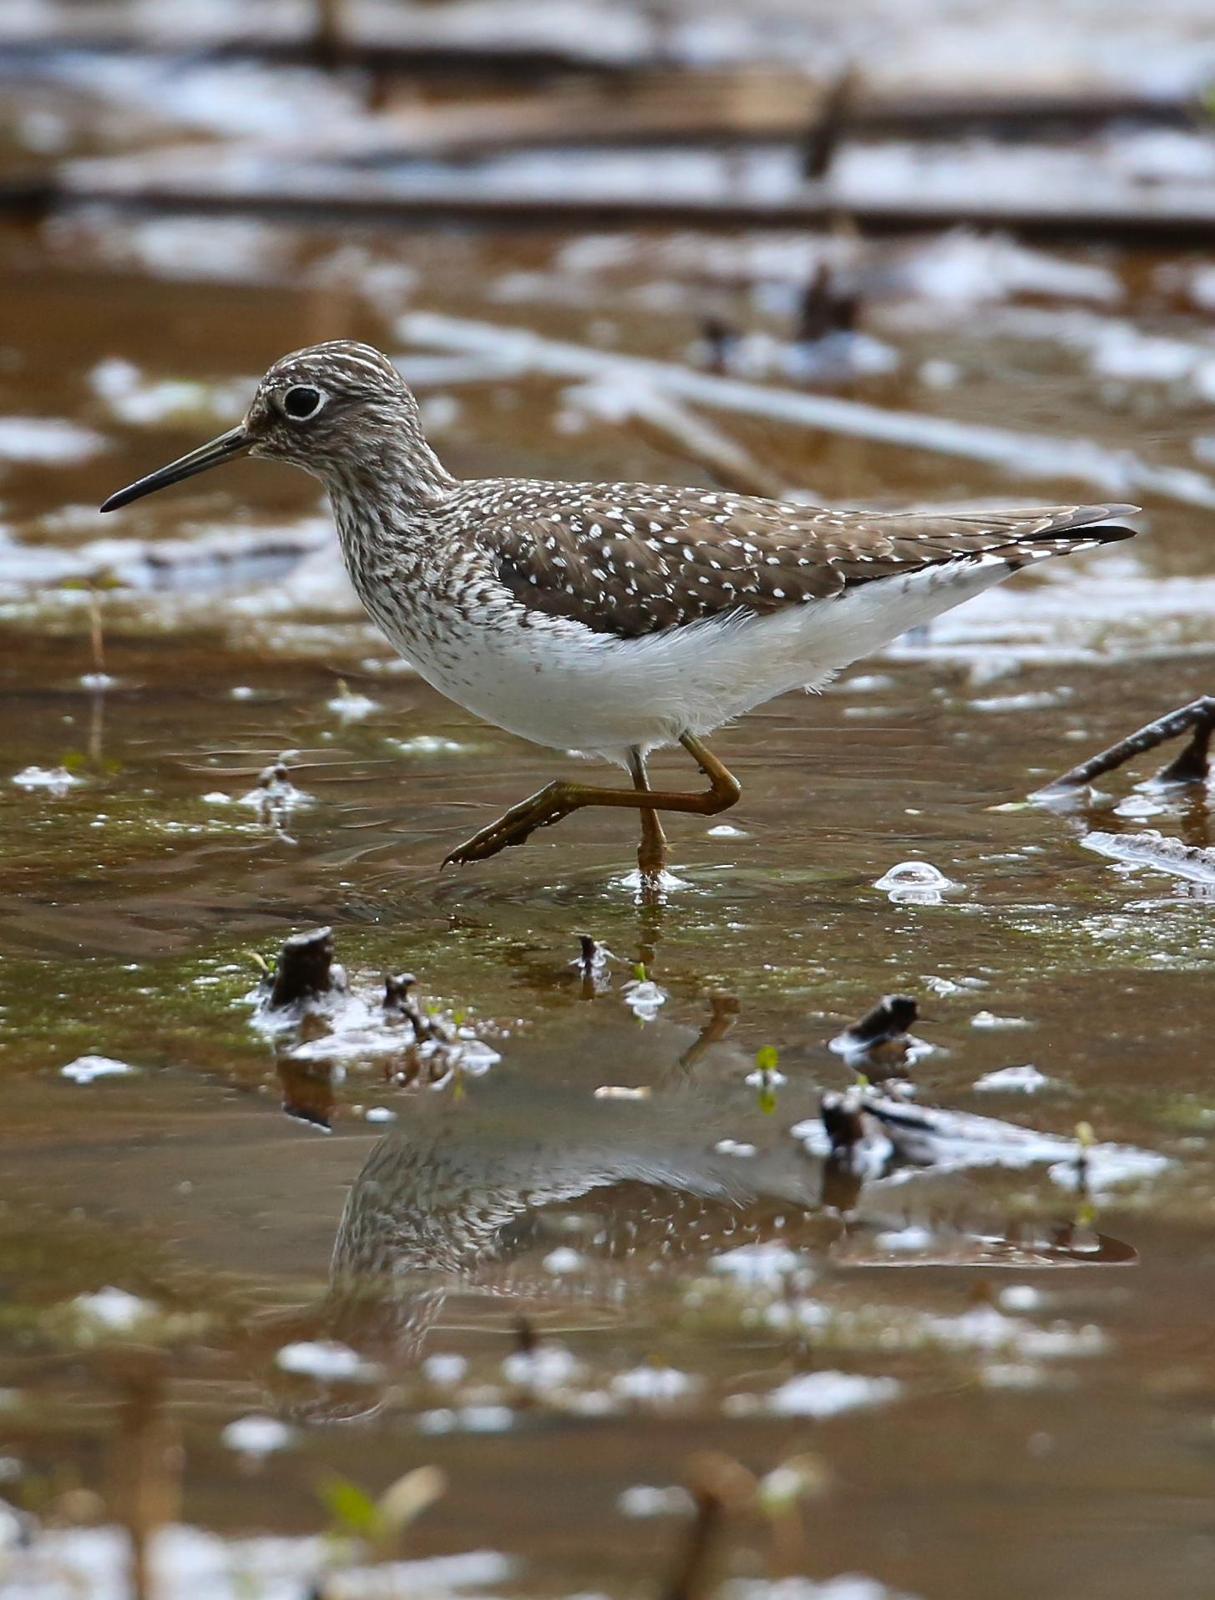 Solitary Sandpiper Photo by Lesley Roy